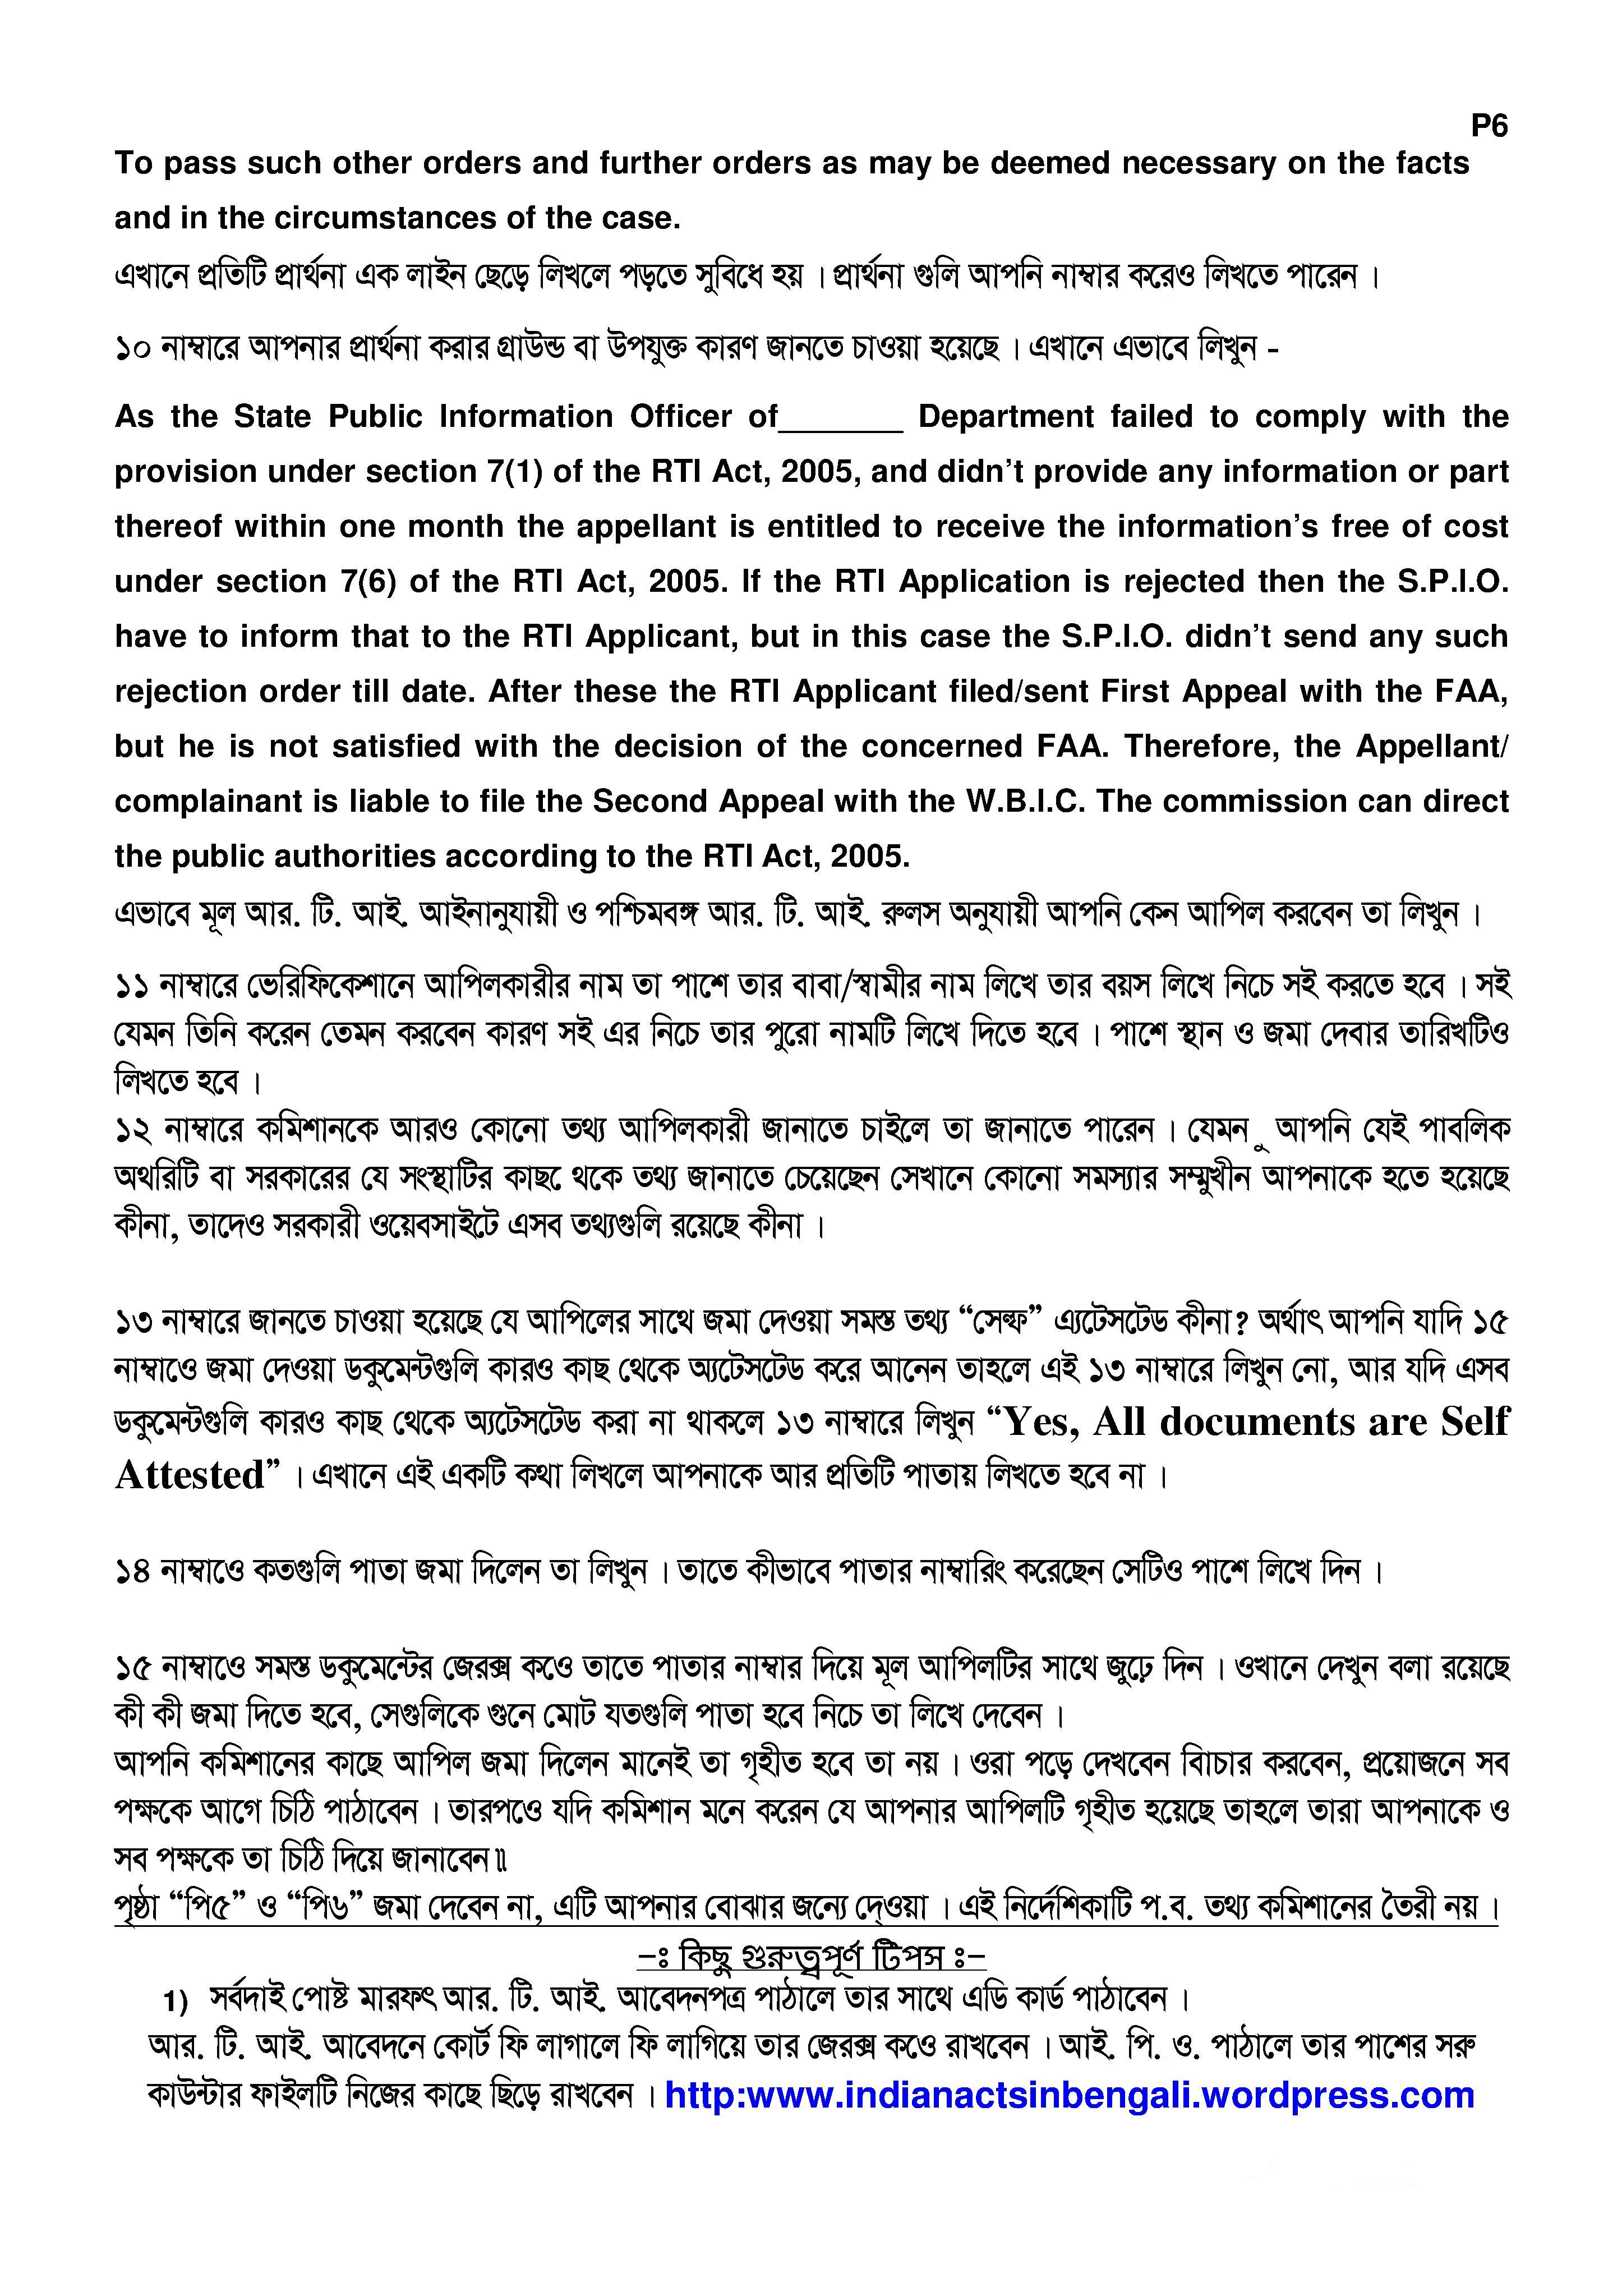 RTI Right to Information   indian acts in bengali